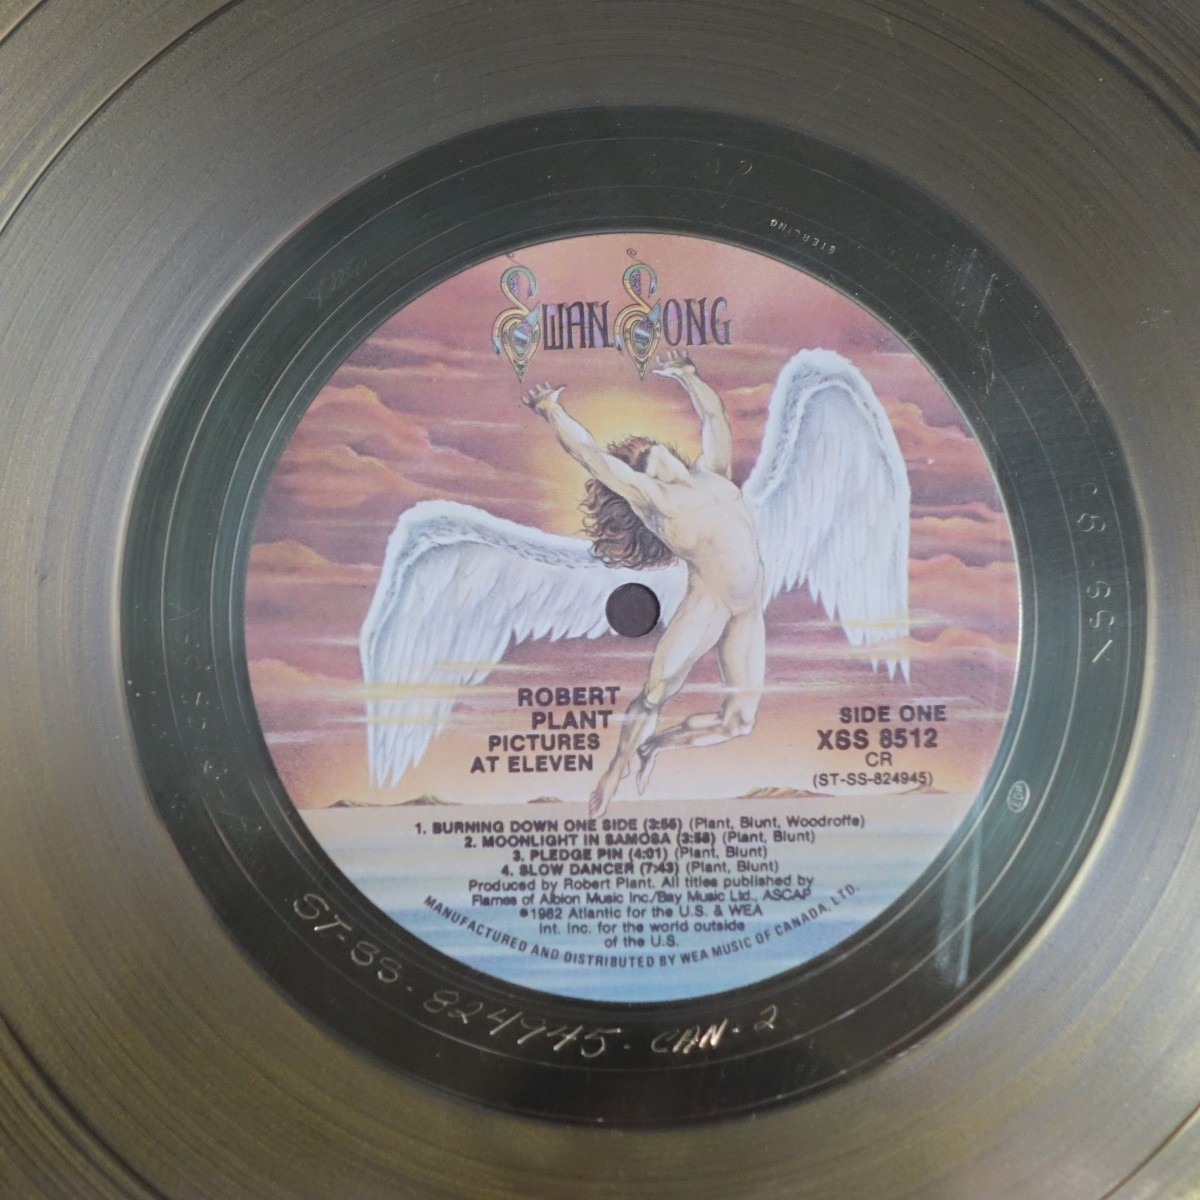 Phil Collins Swan Song Gold LP Award